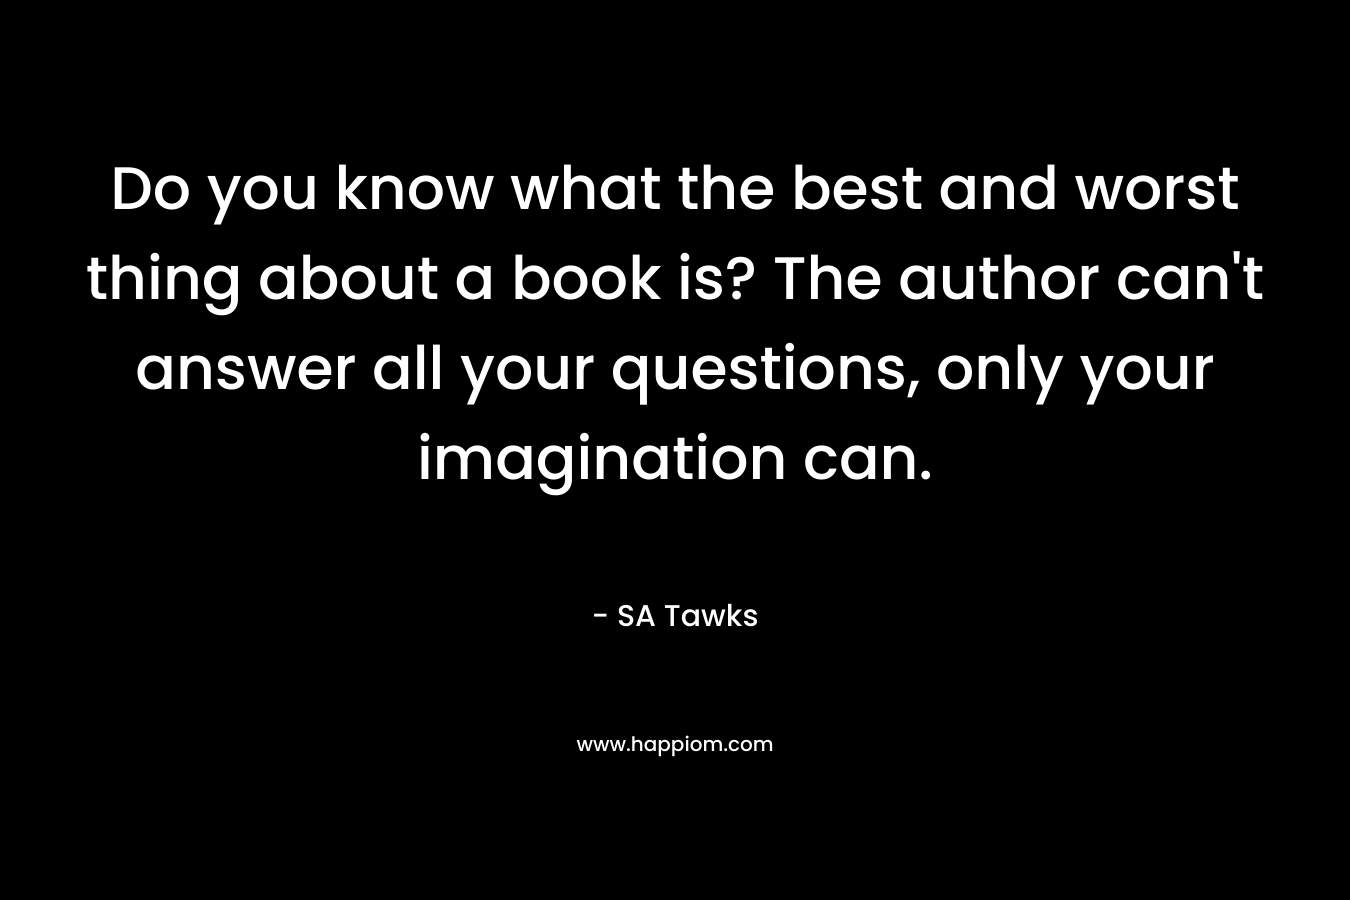 Do you know what the best and worst thing about a book is? The author can't answer all your questions, only your imagination can.